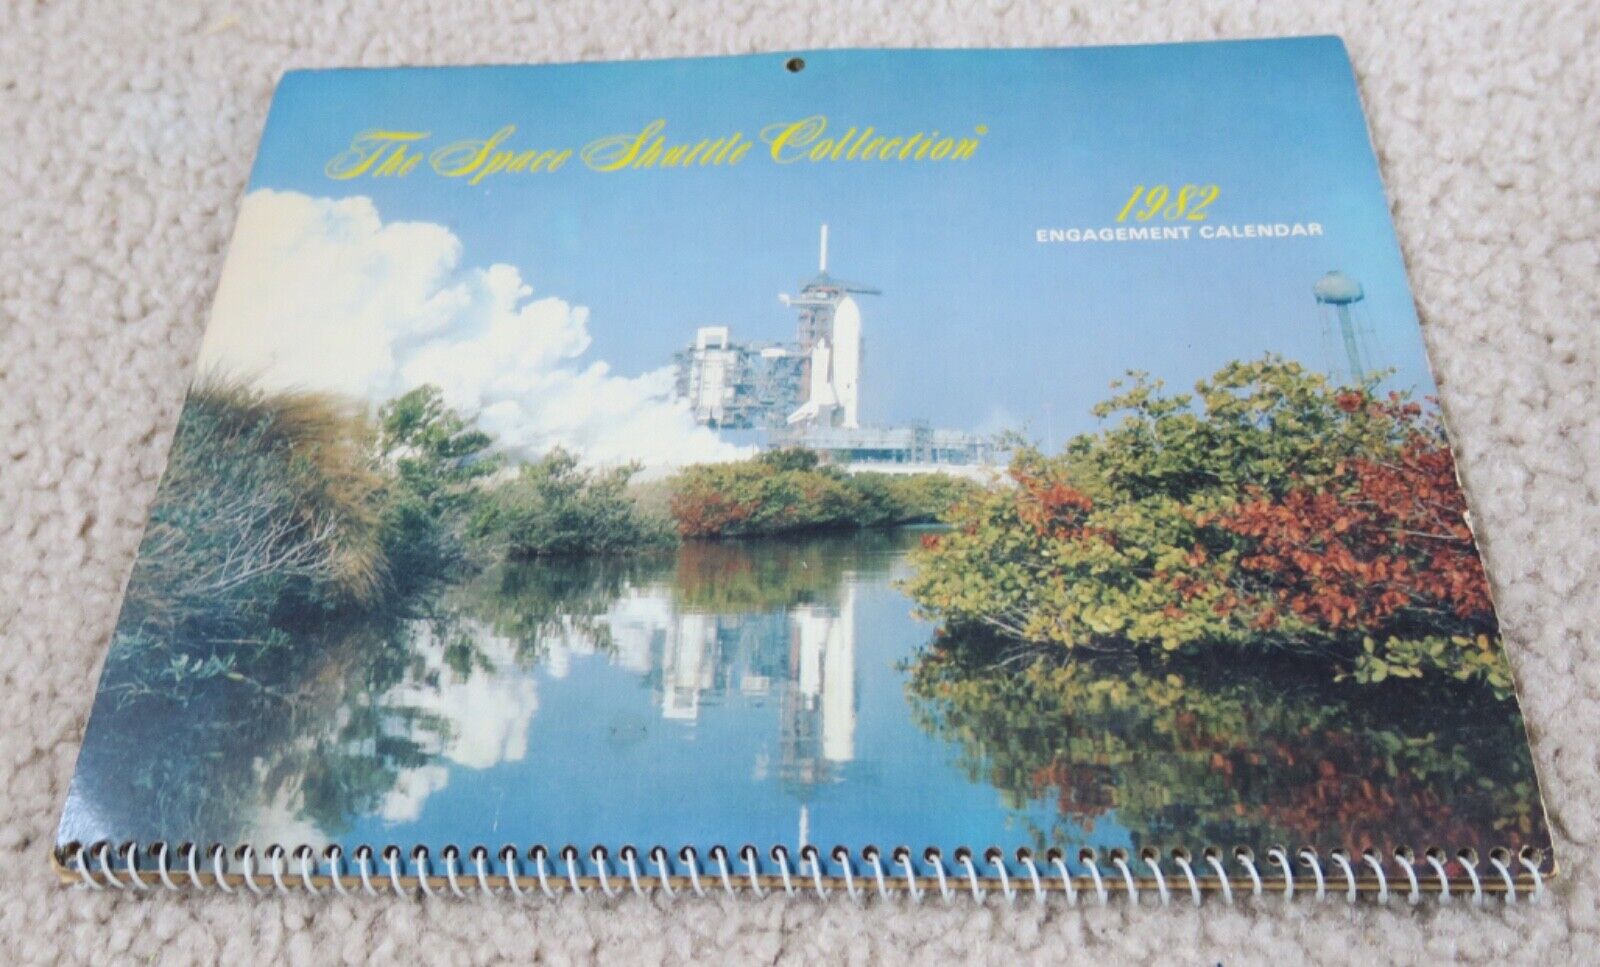 Space Shuttle Collection, 1982 Engagement Calendar NASA 1st Edition